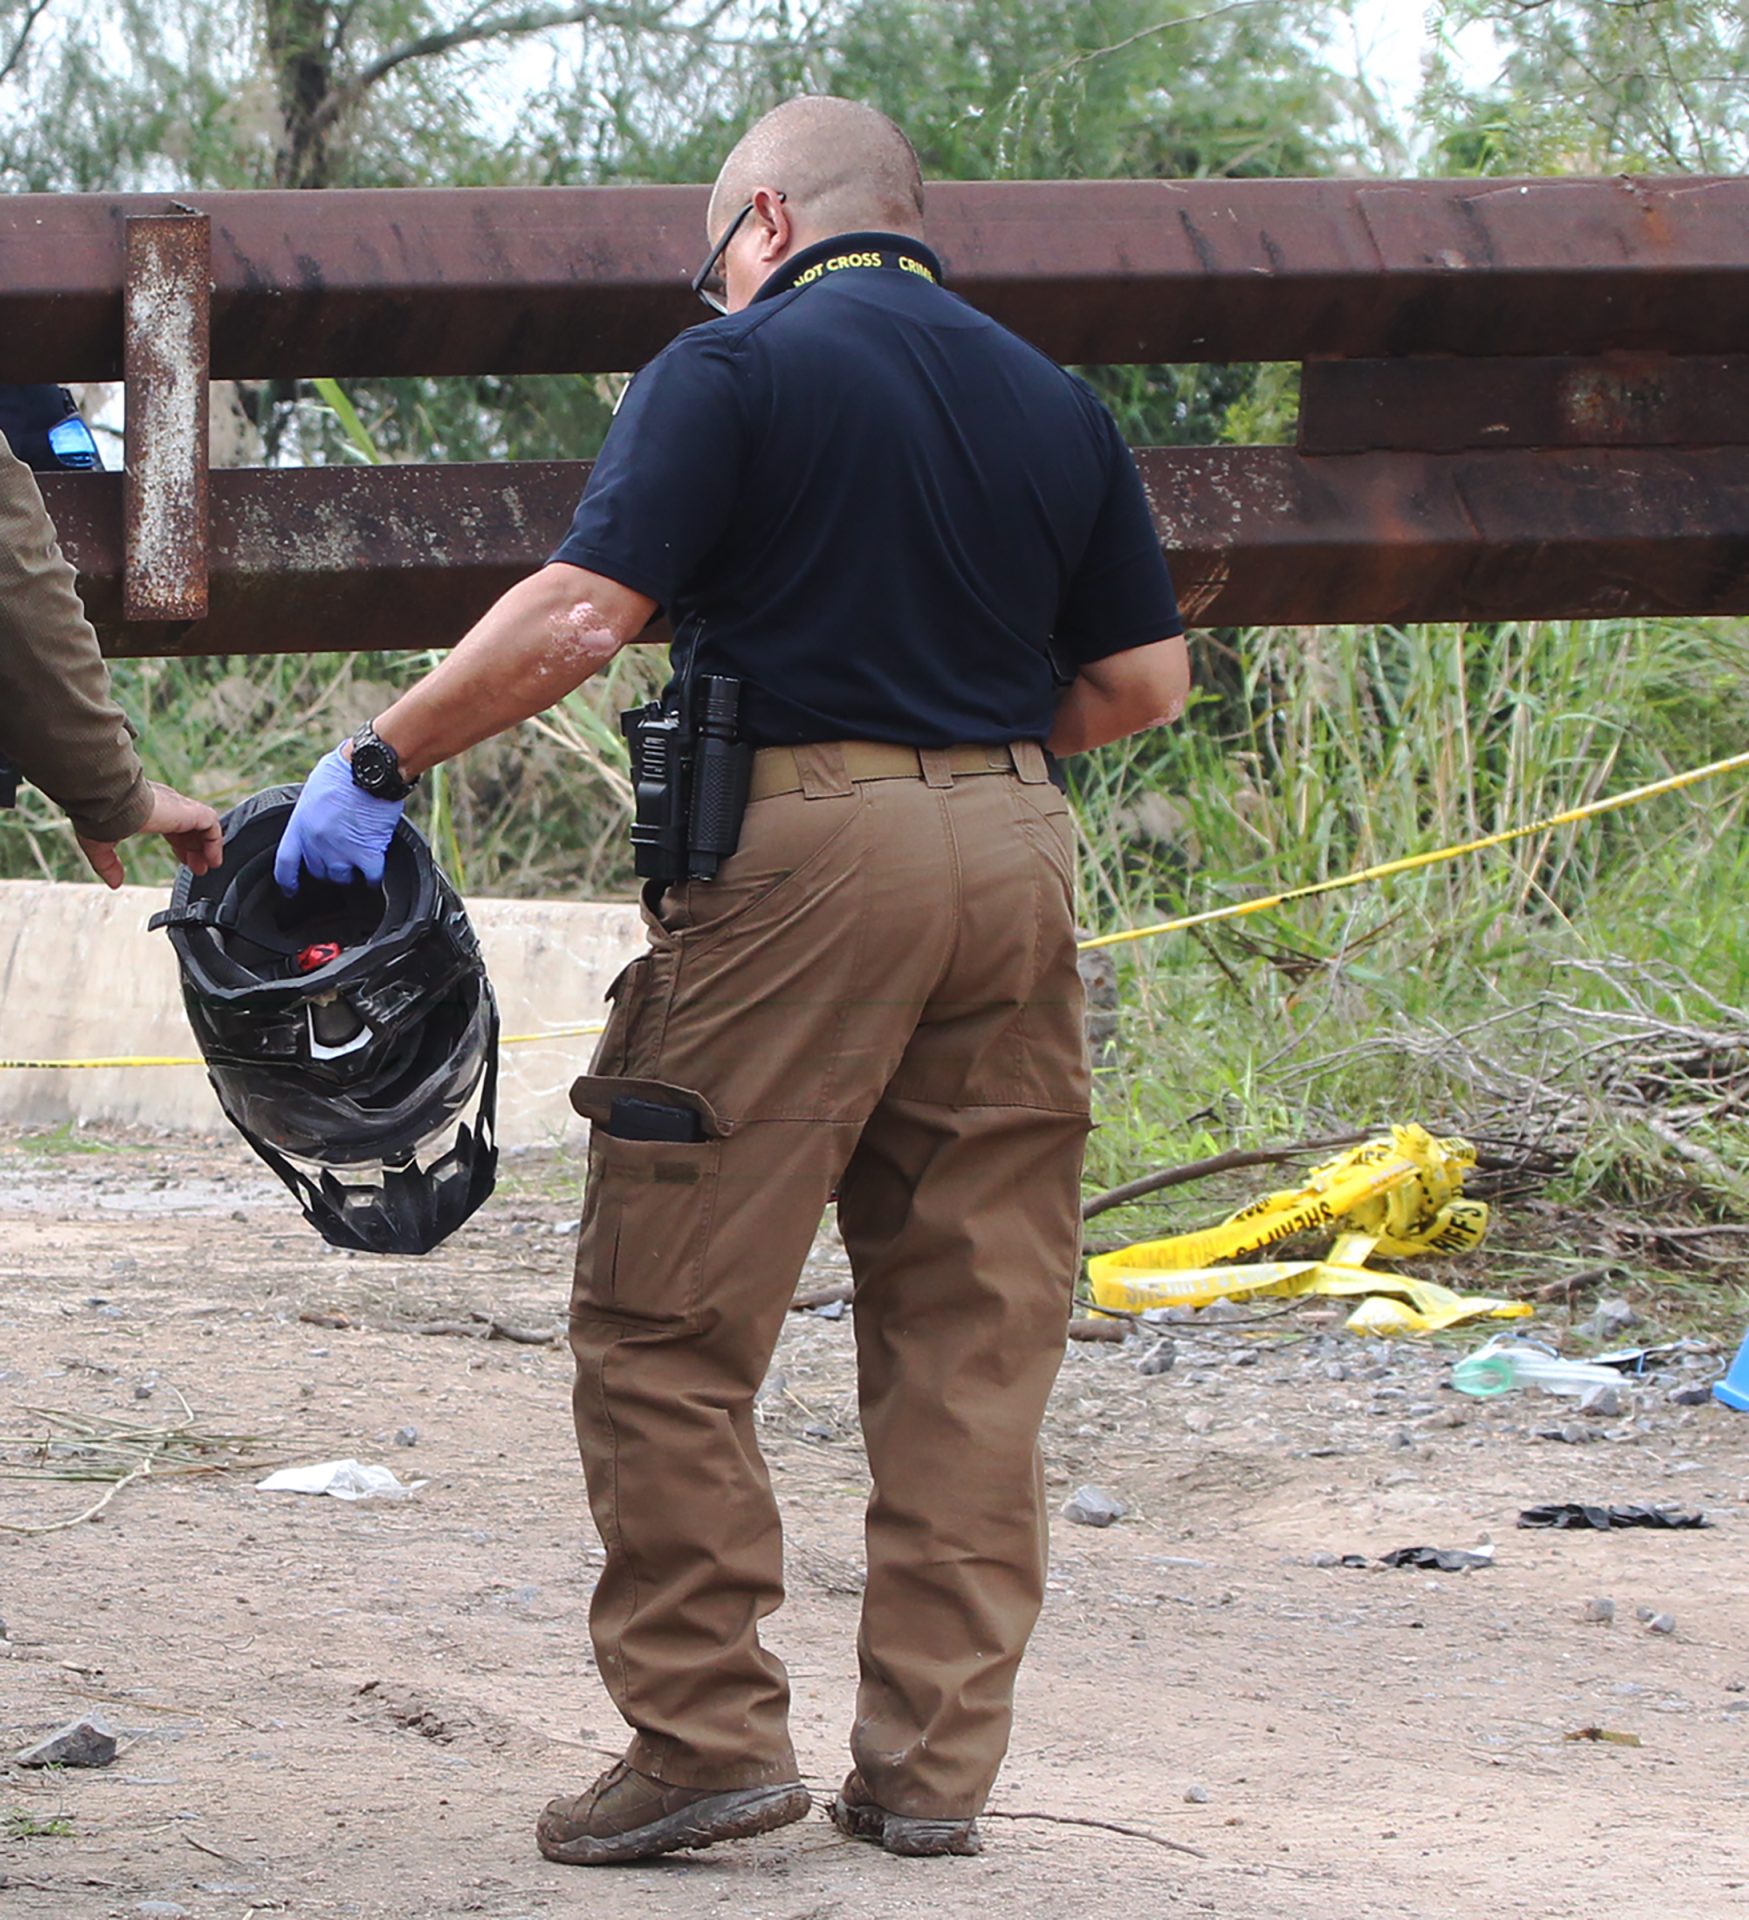 U.S. Border Patrol agent on ATV dies in accident while on duty